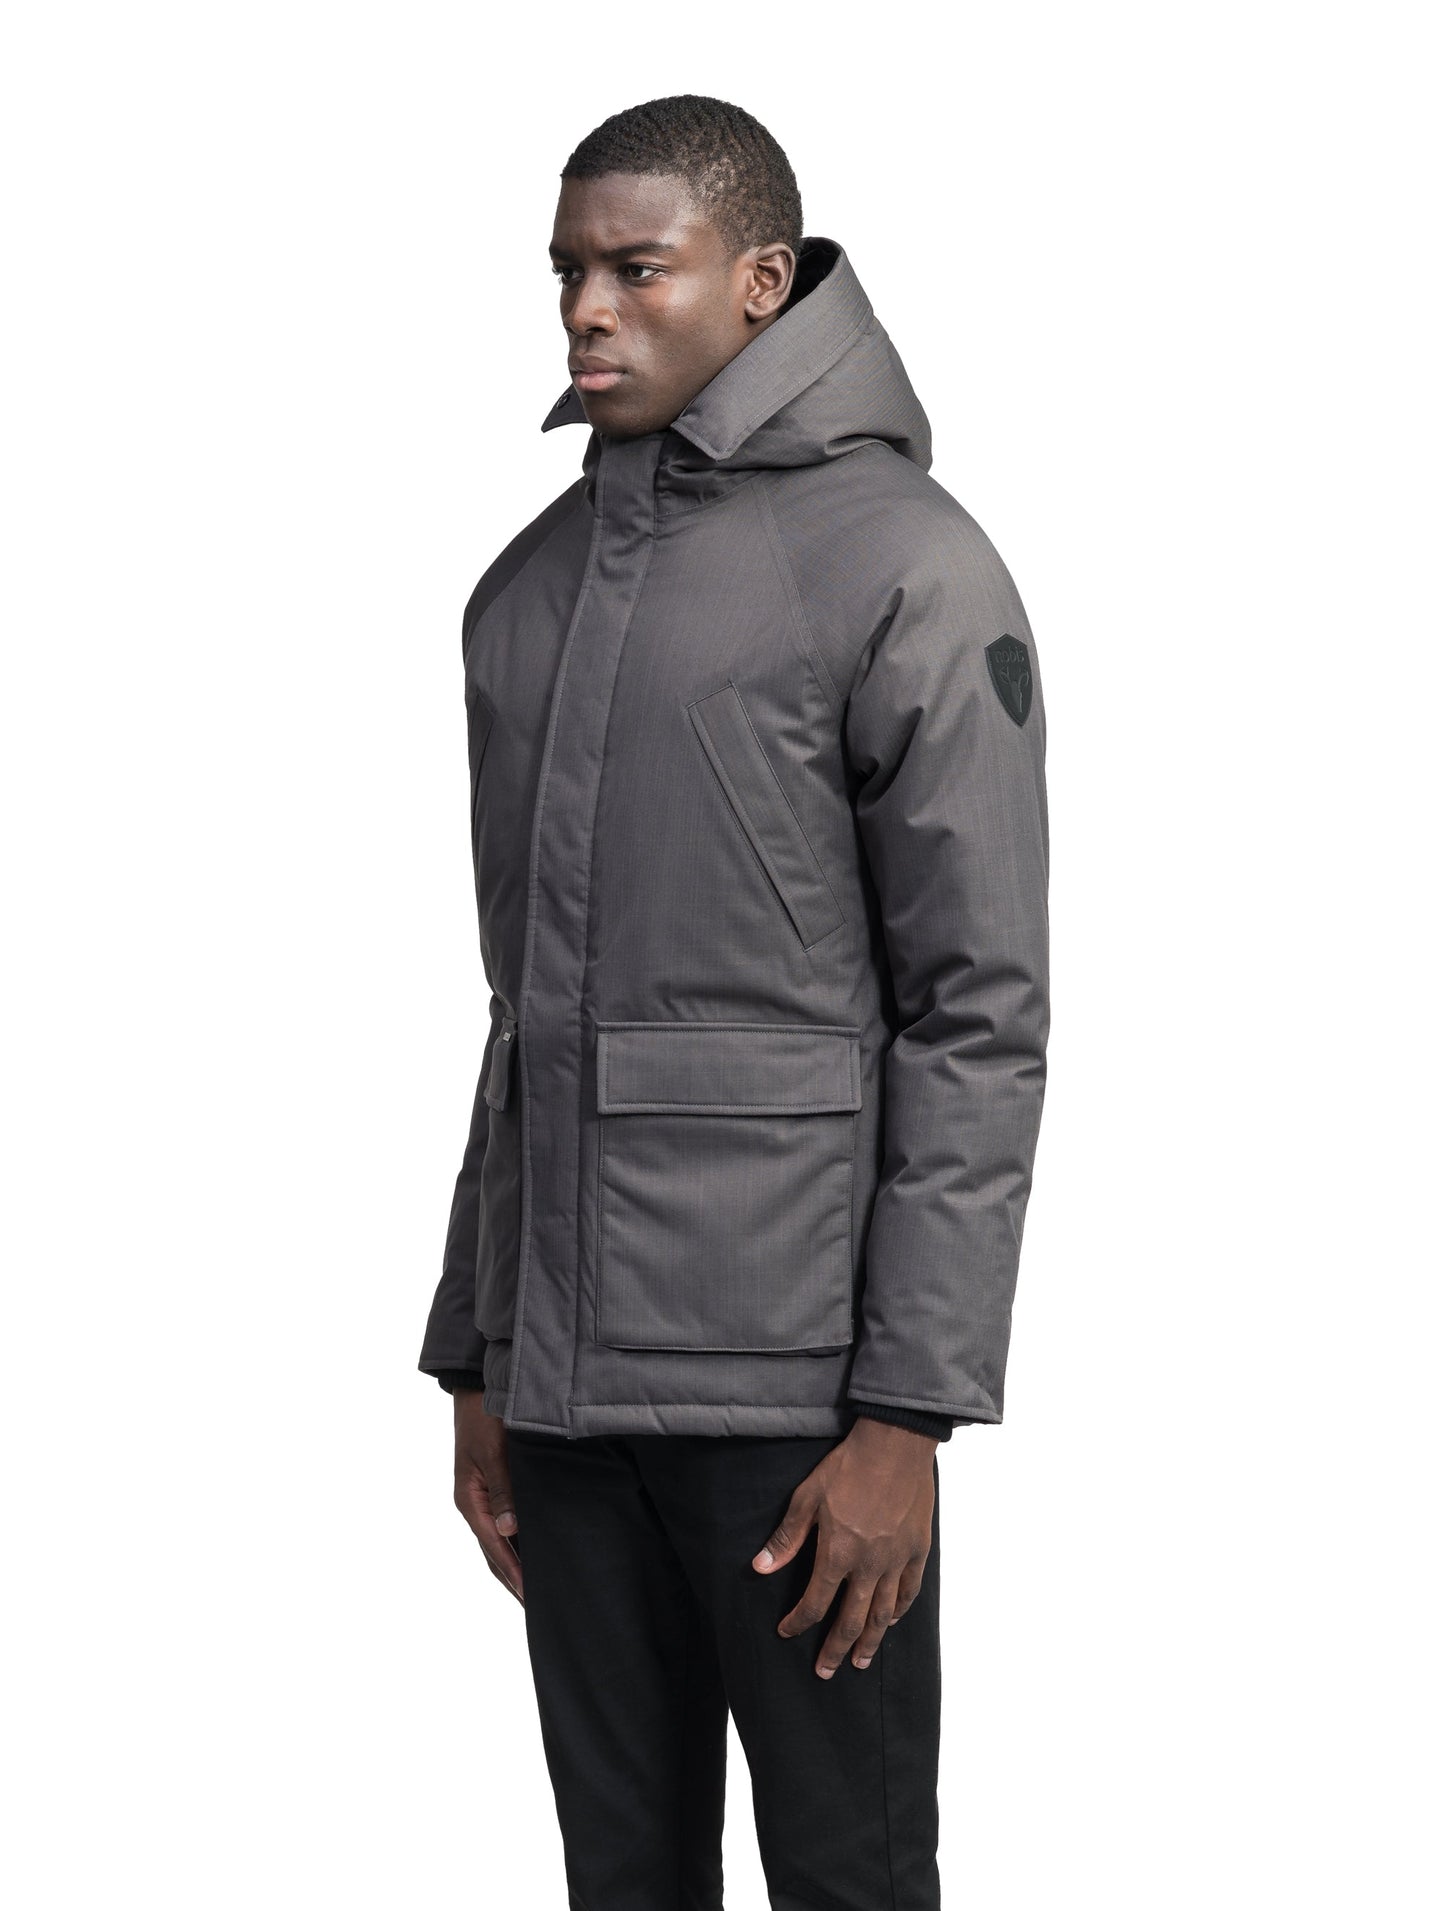 Heritage Furless Men's Parka in hip length, Canadian white duck down insulation, non-removable hood, front zipper with magnetic placket, chest hand warmer pockets, waist flap pockets, and elastic cuffs, in Steel Grey